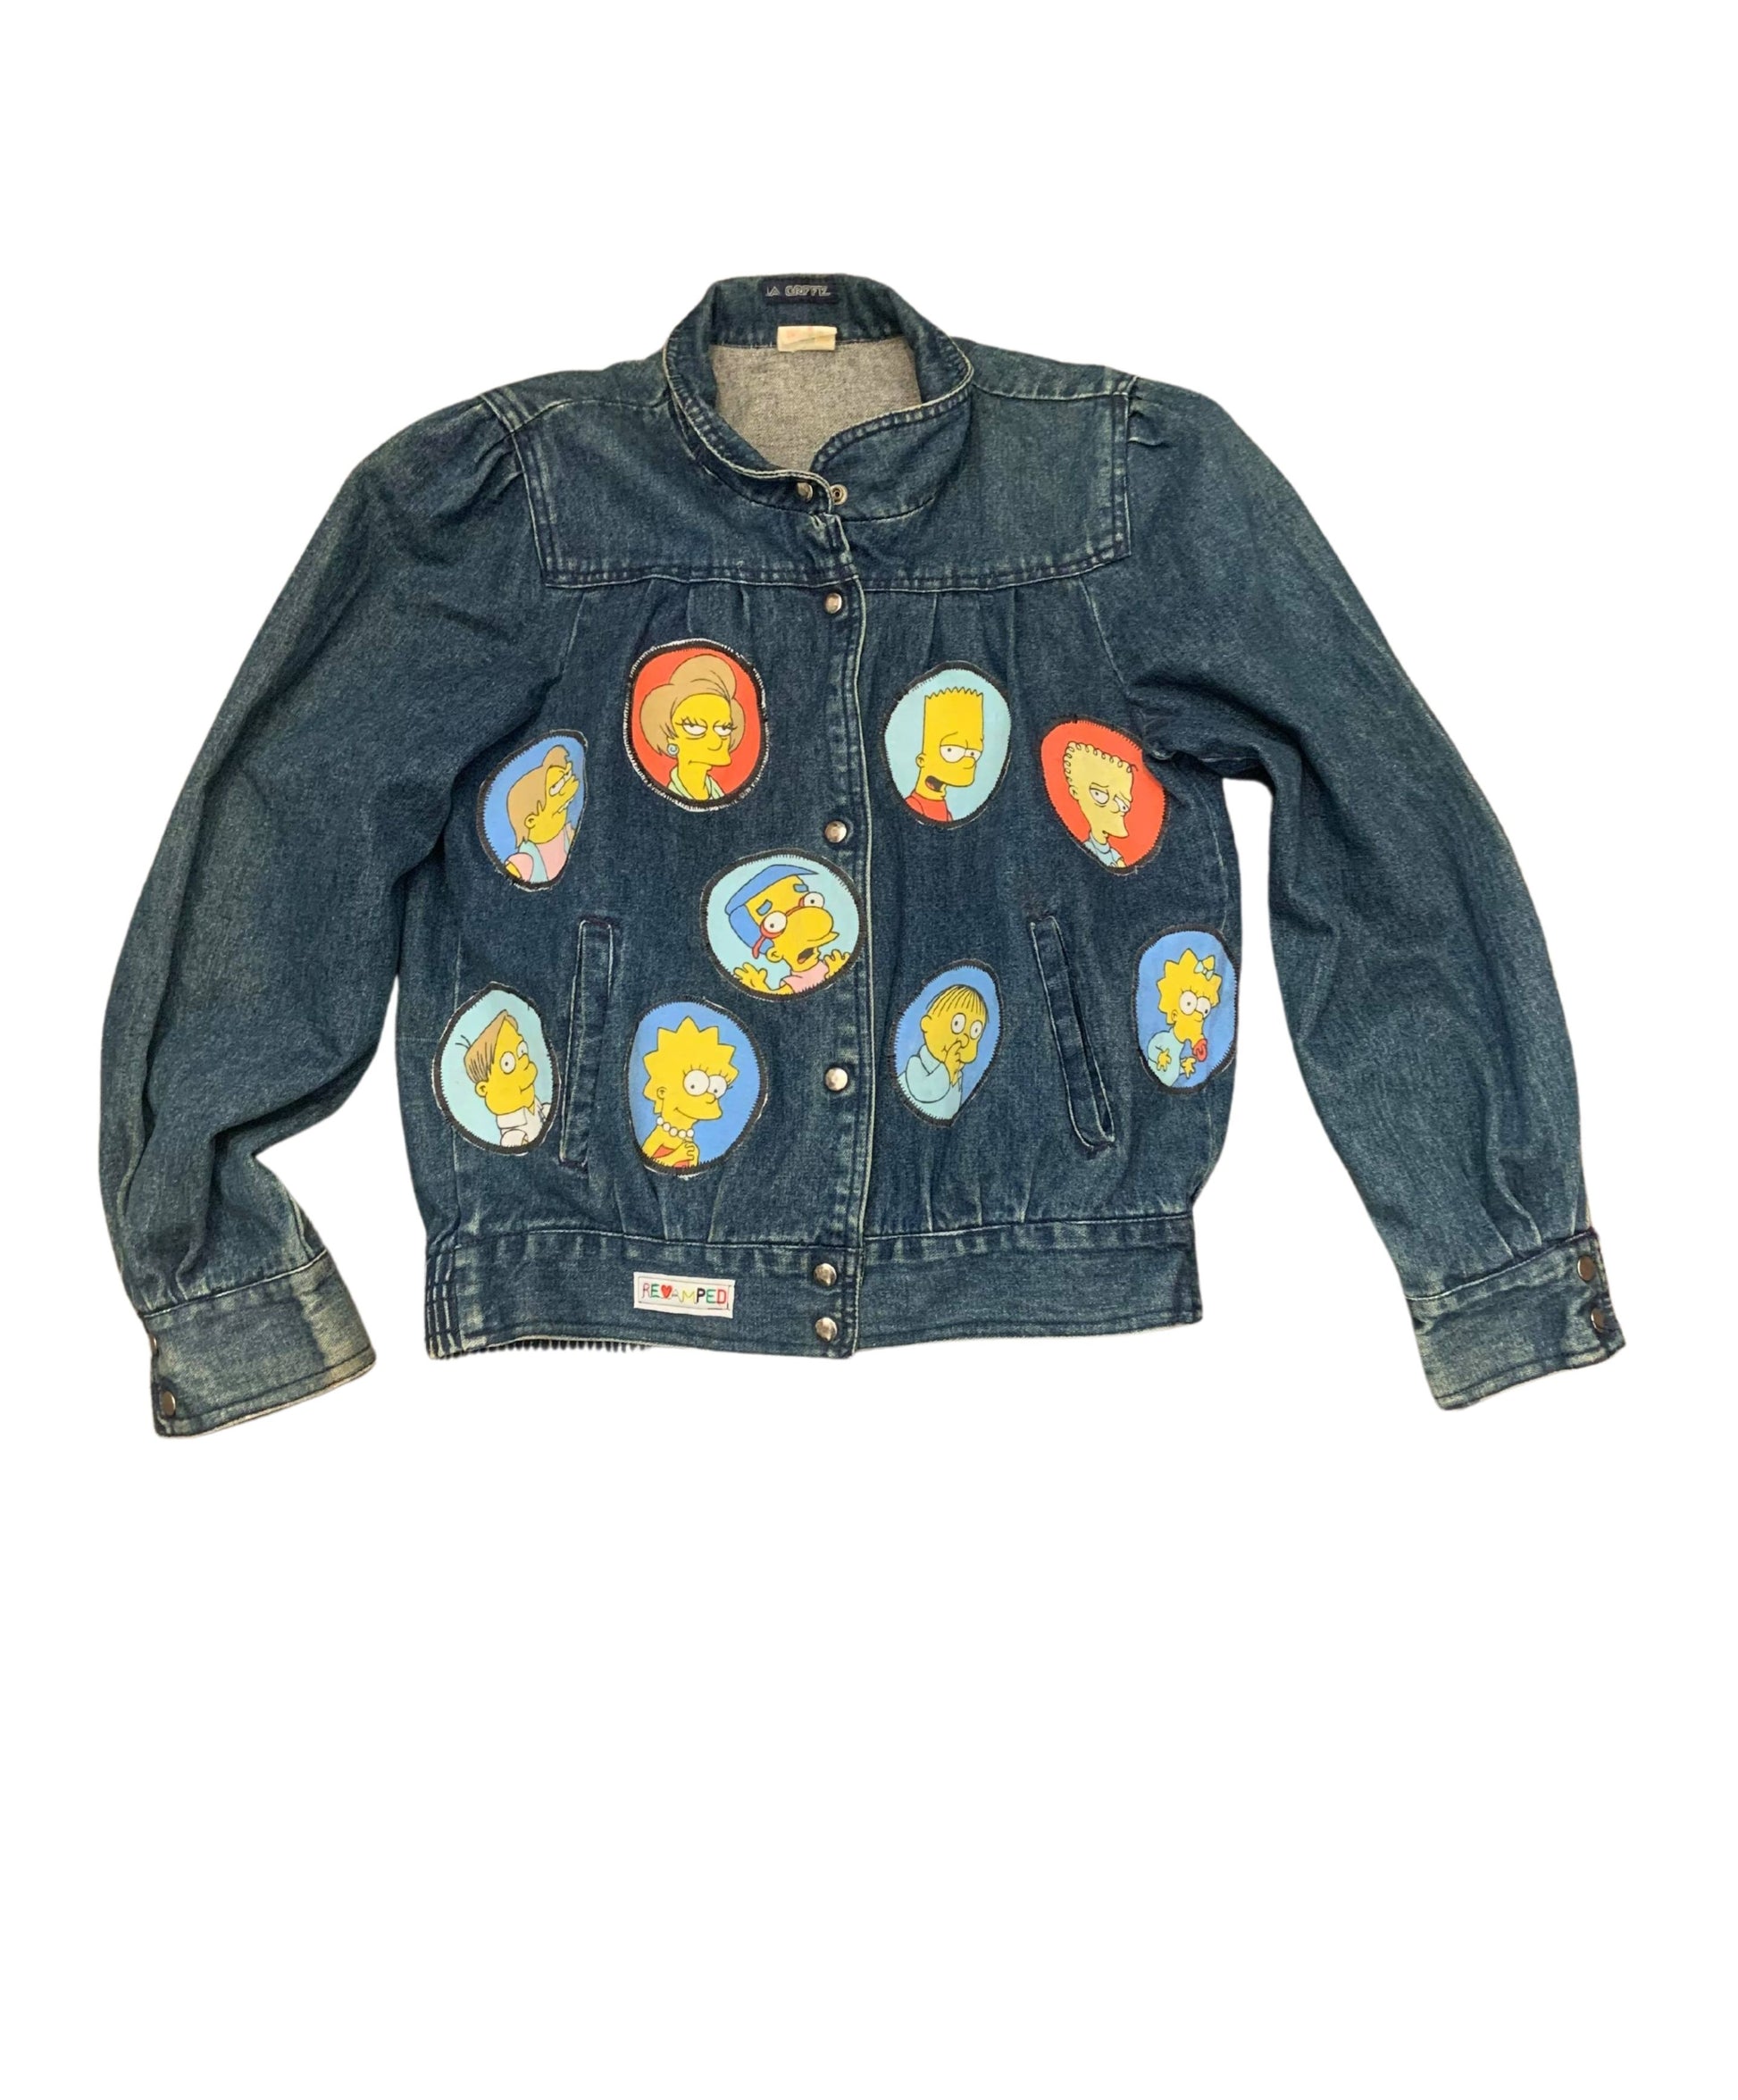 "THE SIMPSONS" REVAMPED JEAN JACKET. Alterations available 